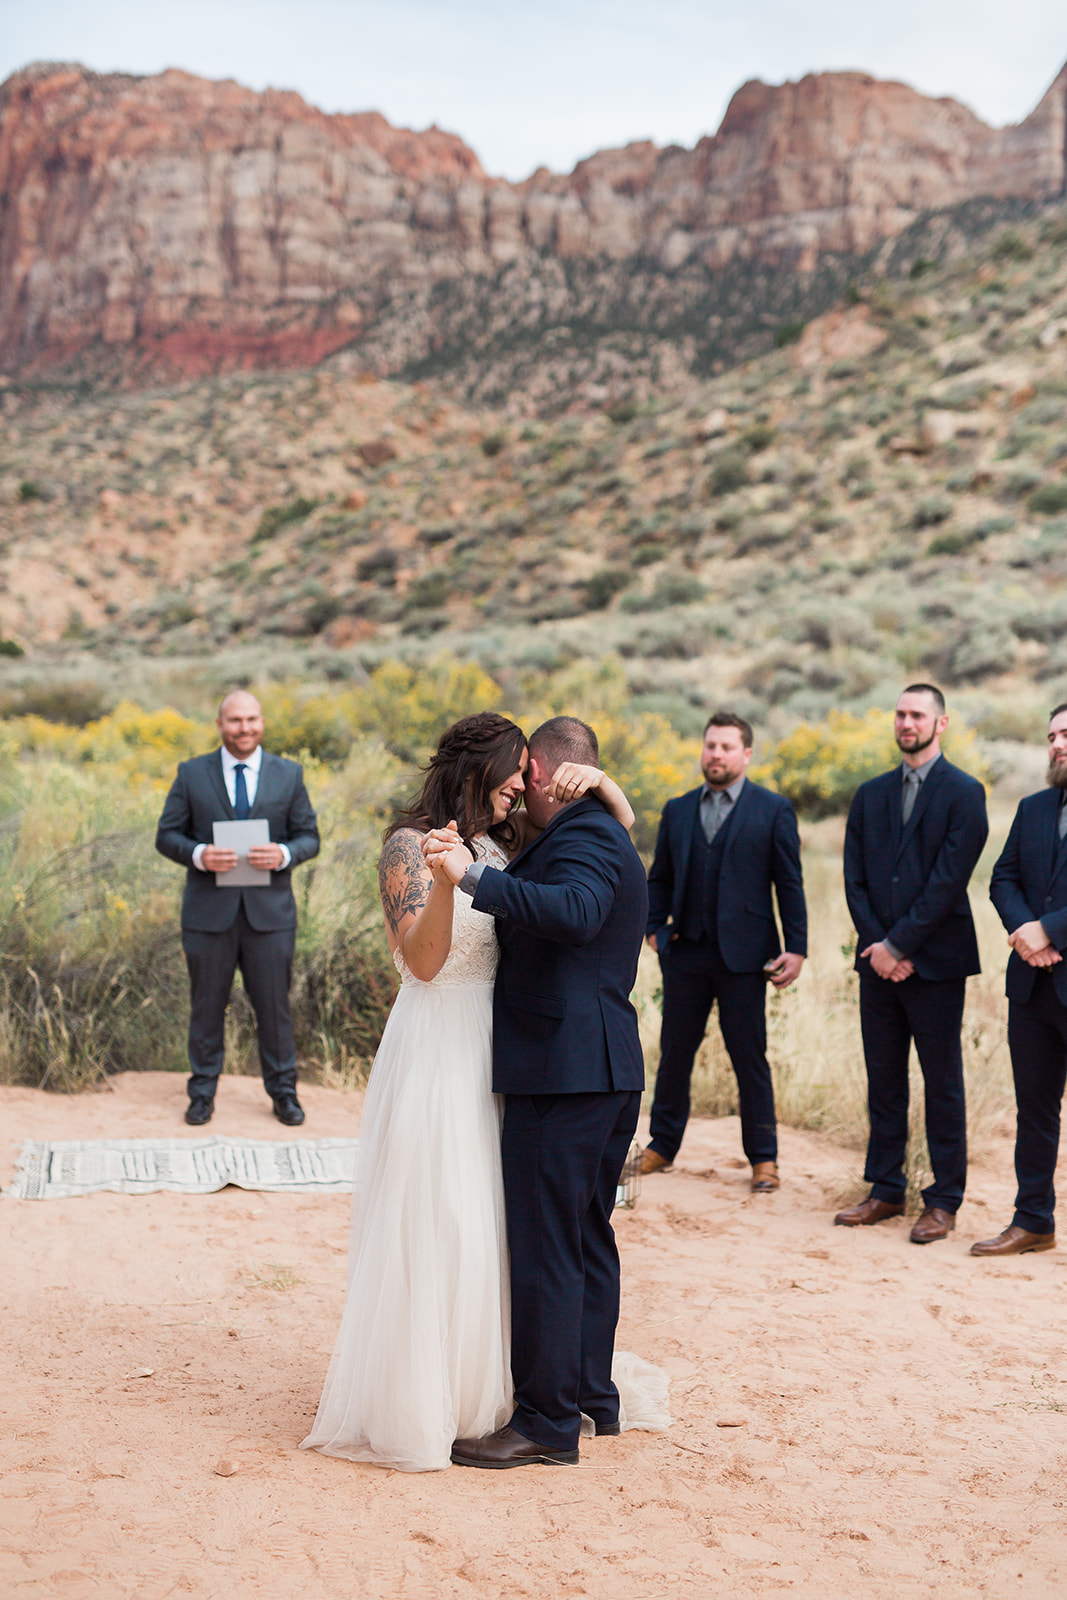 first dance in front of dramatic Zion mountains